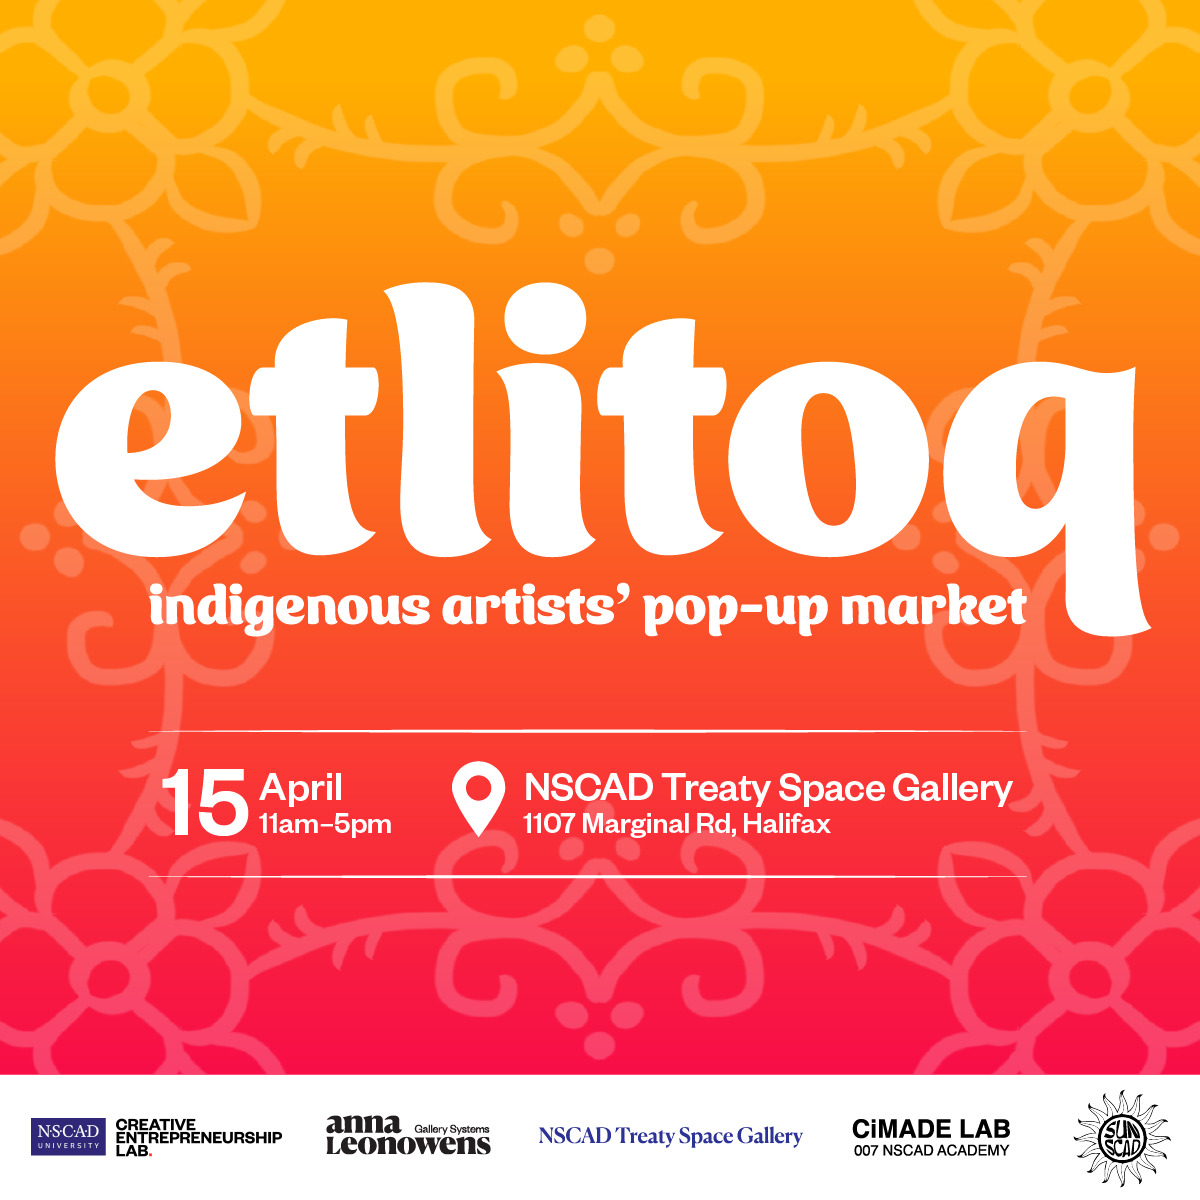 Dark pink, orange and yellow gradient background with white low-opacity floral and Mi'kmaw double curve design overlay. Large white text in forefront reading "Etlitoq: Indigenous Artists' Pop-Up Market, 15 April 11am–5pm at NSCAD Treaty Space Gallery 1107 Marginal Rd." Small white border on bottom section includes logos of NSCAD Creative Entrepreneurship Lab, Anna Leonowens Gallery Systems, NSCAD Treaty Space Gallery, CiMADE Lab, and SUNSCAD.